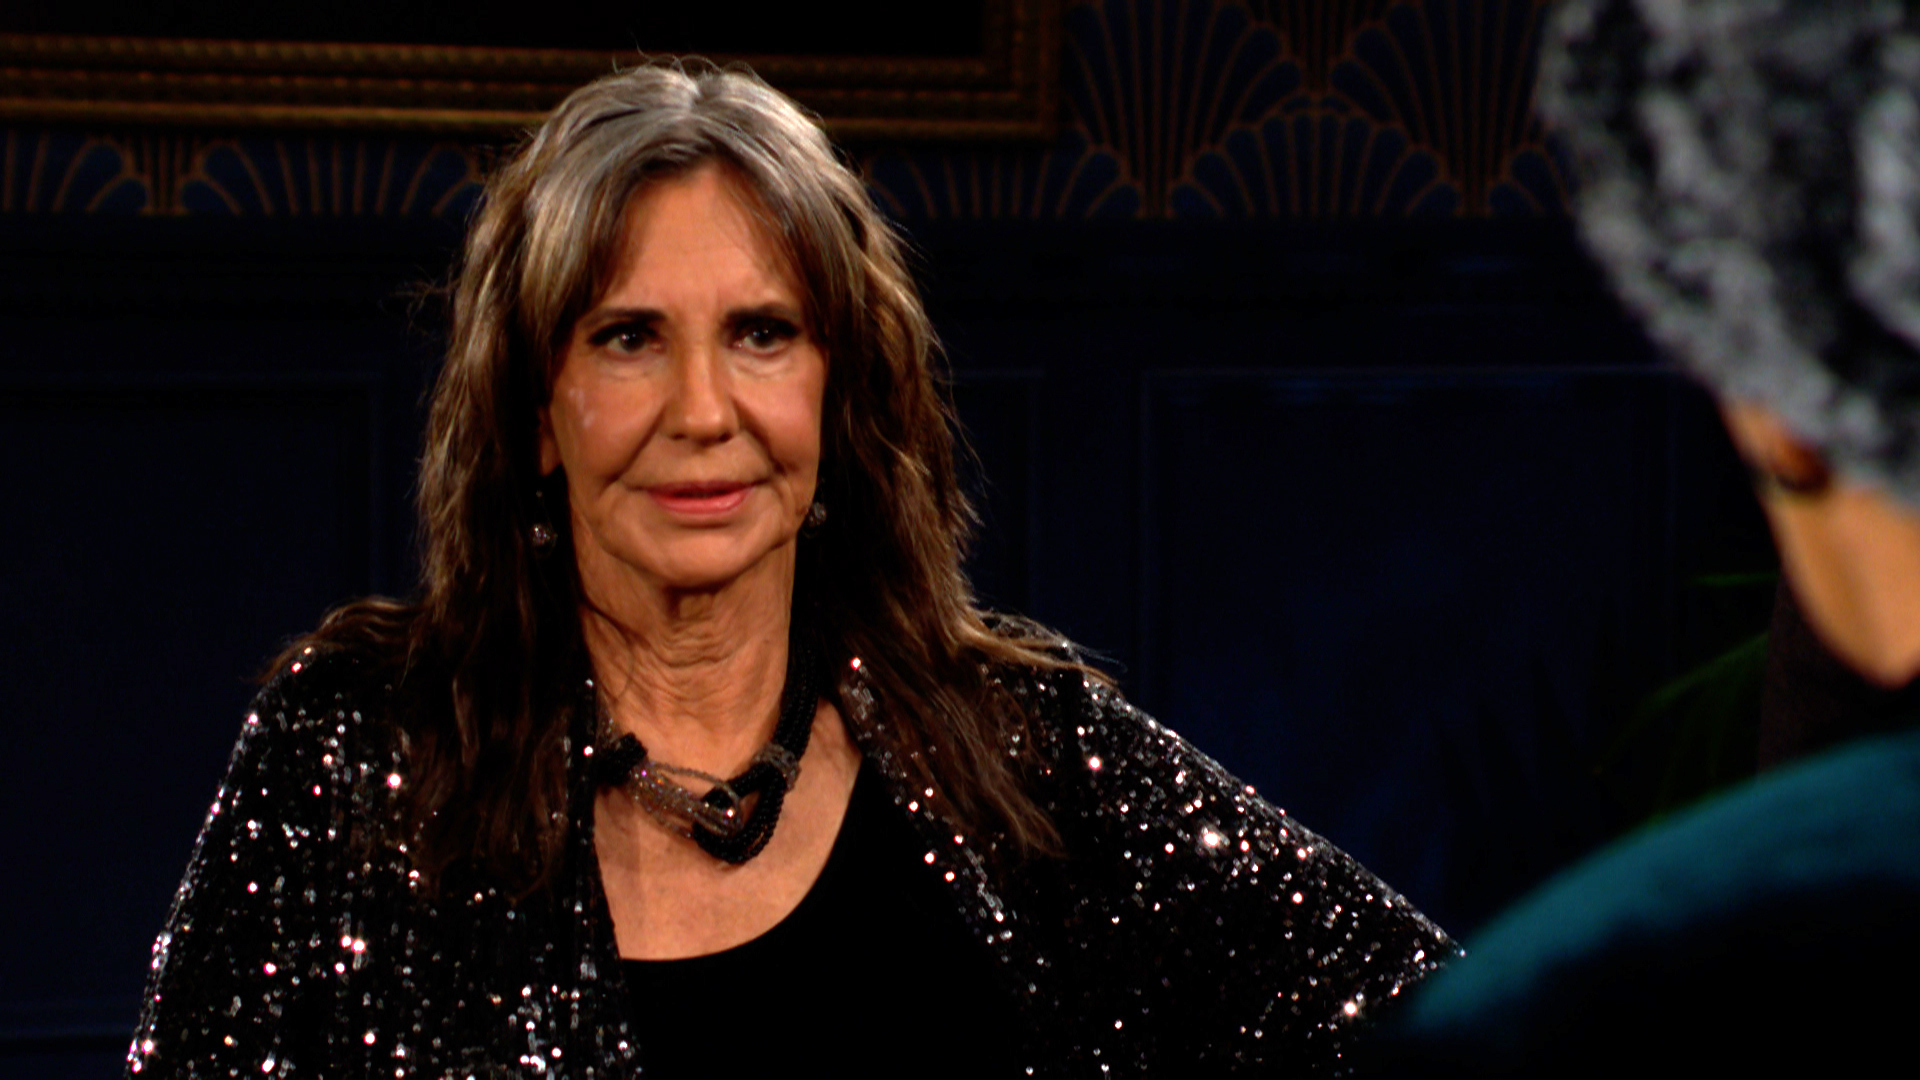 Jess Walton as Jill in a formal dress in The Young and the Restless